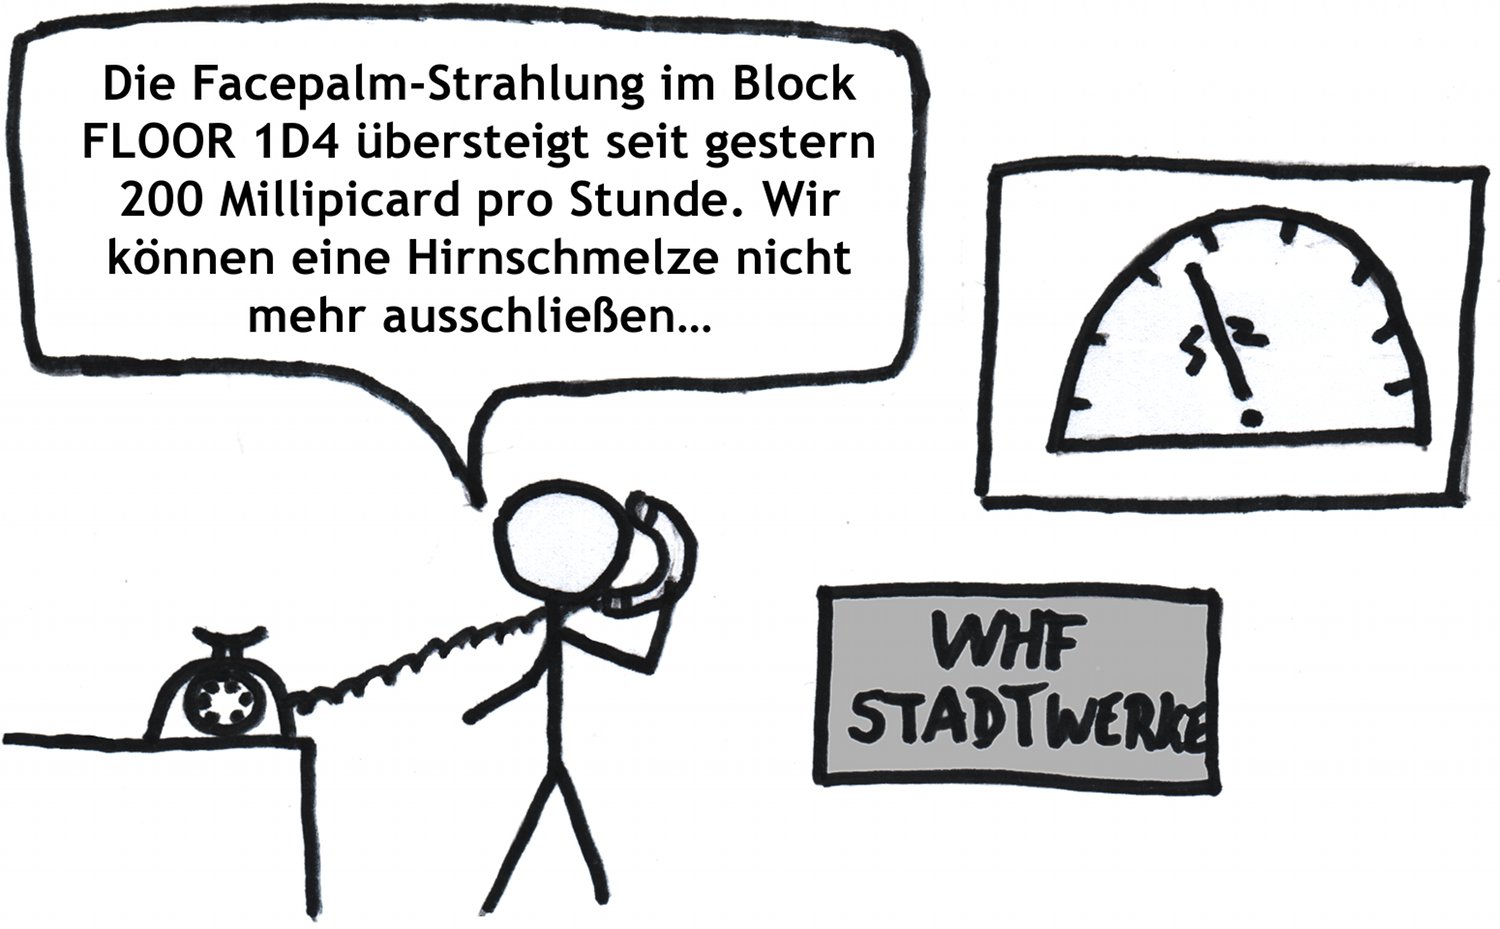 facepalm-strahlung.jpeg